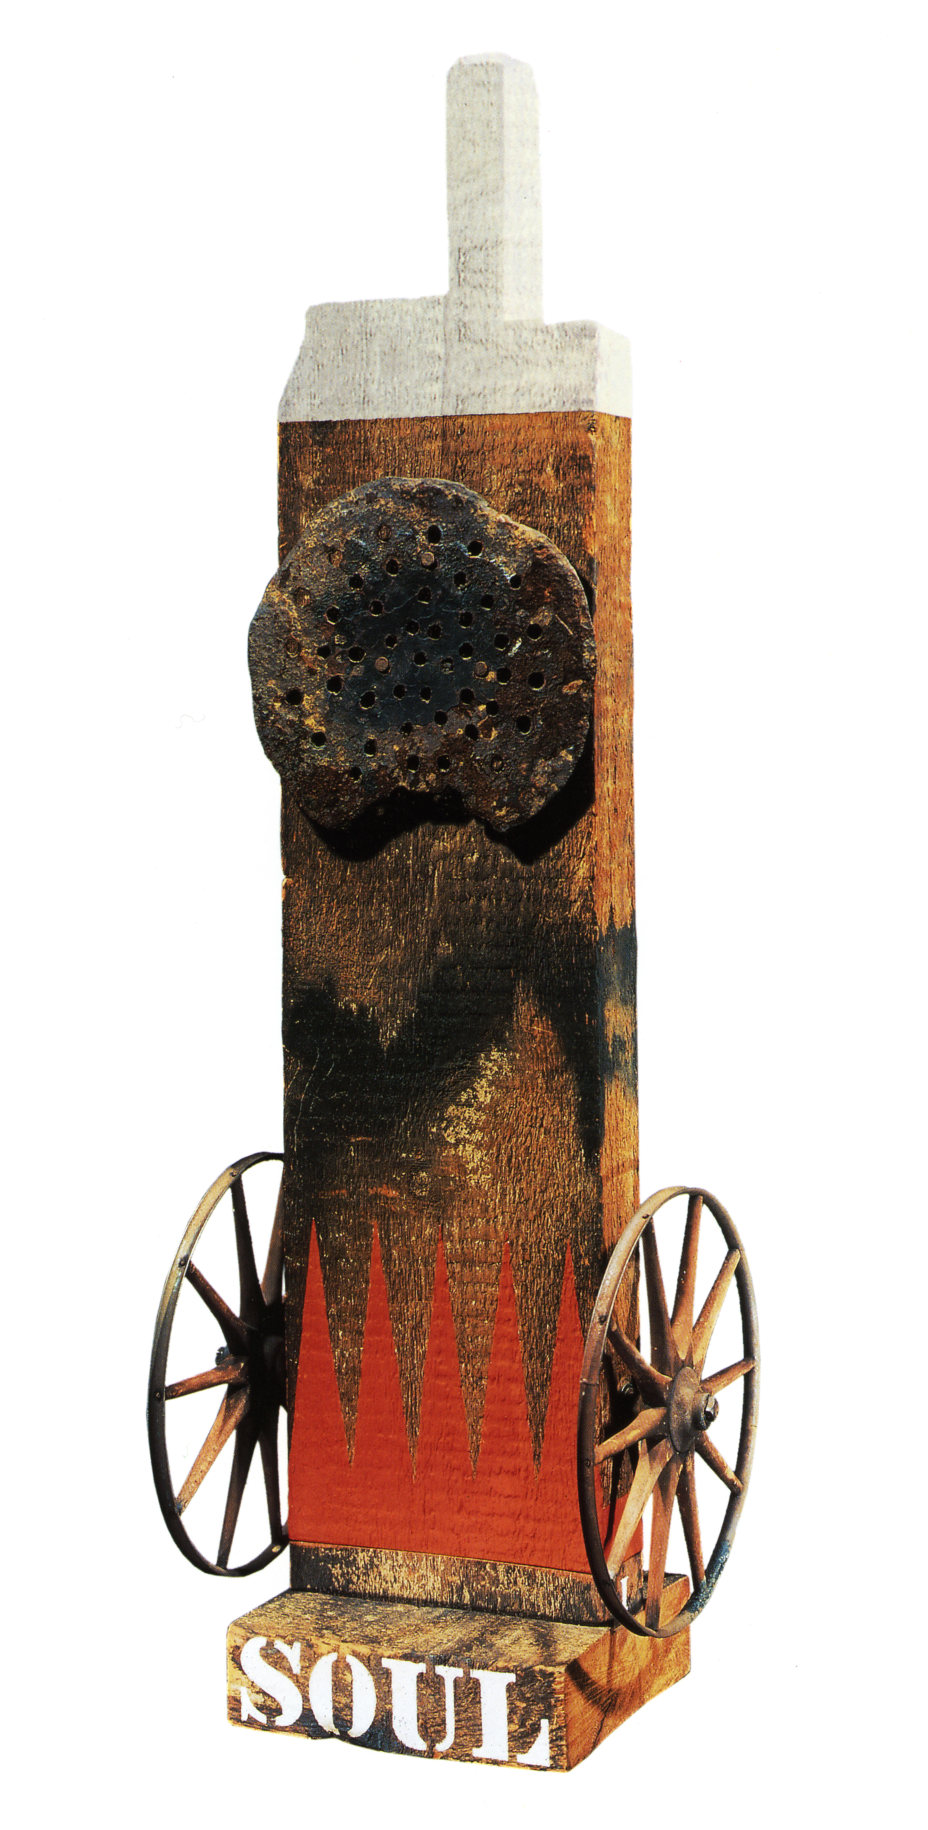 A 50 1/2 by 16 3/4 by 13 1/2 inch sculpture consisting of a wooden beam with a tenon, resting on a wooden base. The work's title, Soul, is painted in white stenciled letters across the bottom of the base. Iron wheels have been affixed to the bottom left and right of the sculpture, in between the wheels are red painted flames. Towards the top of the sculpture is a weathered metal disk. The beam's tenon and top few inches have been painted white.